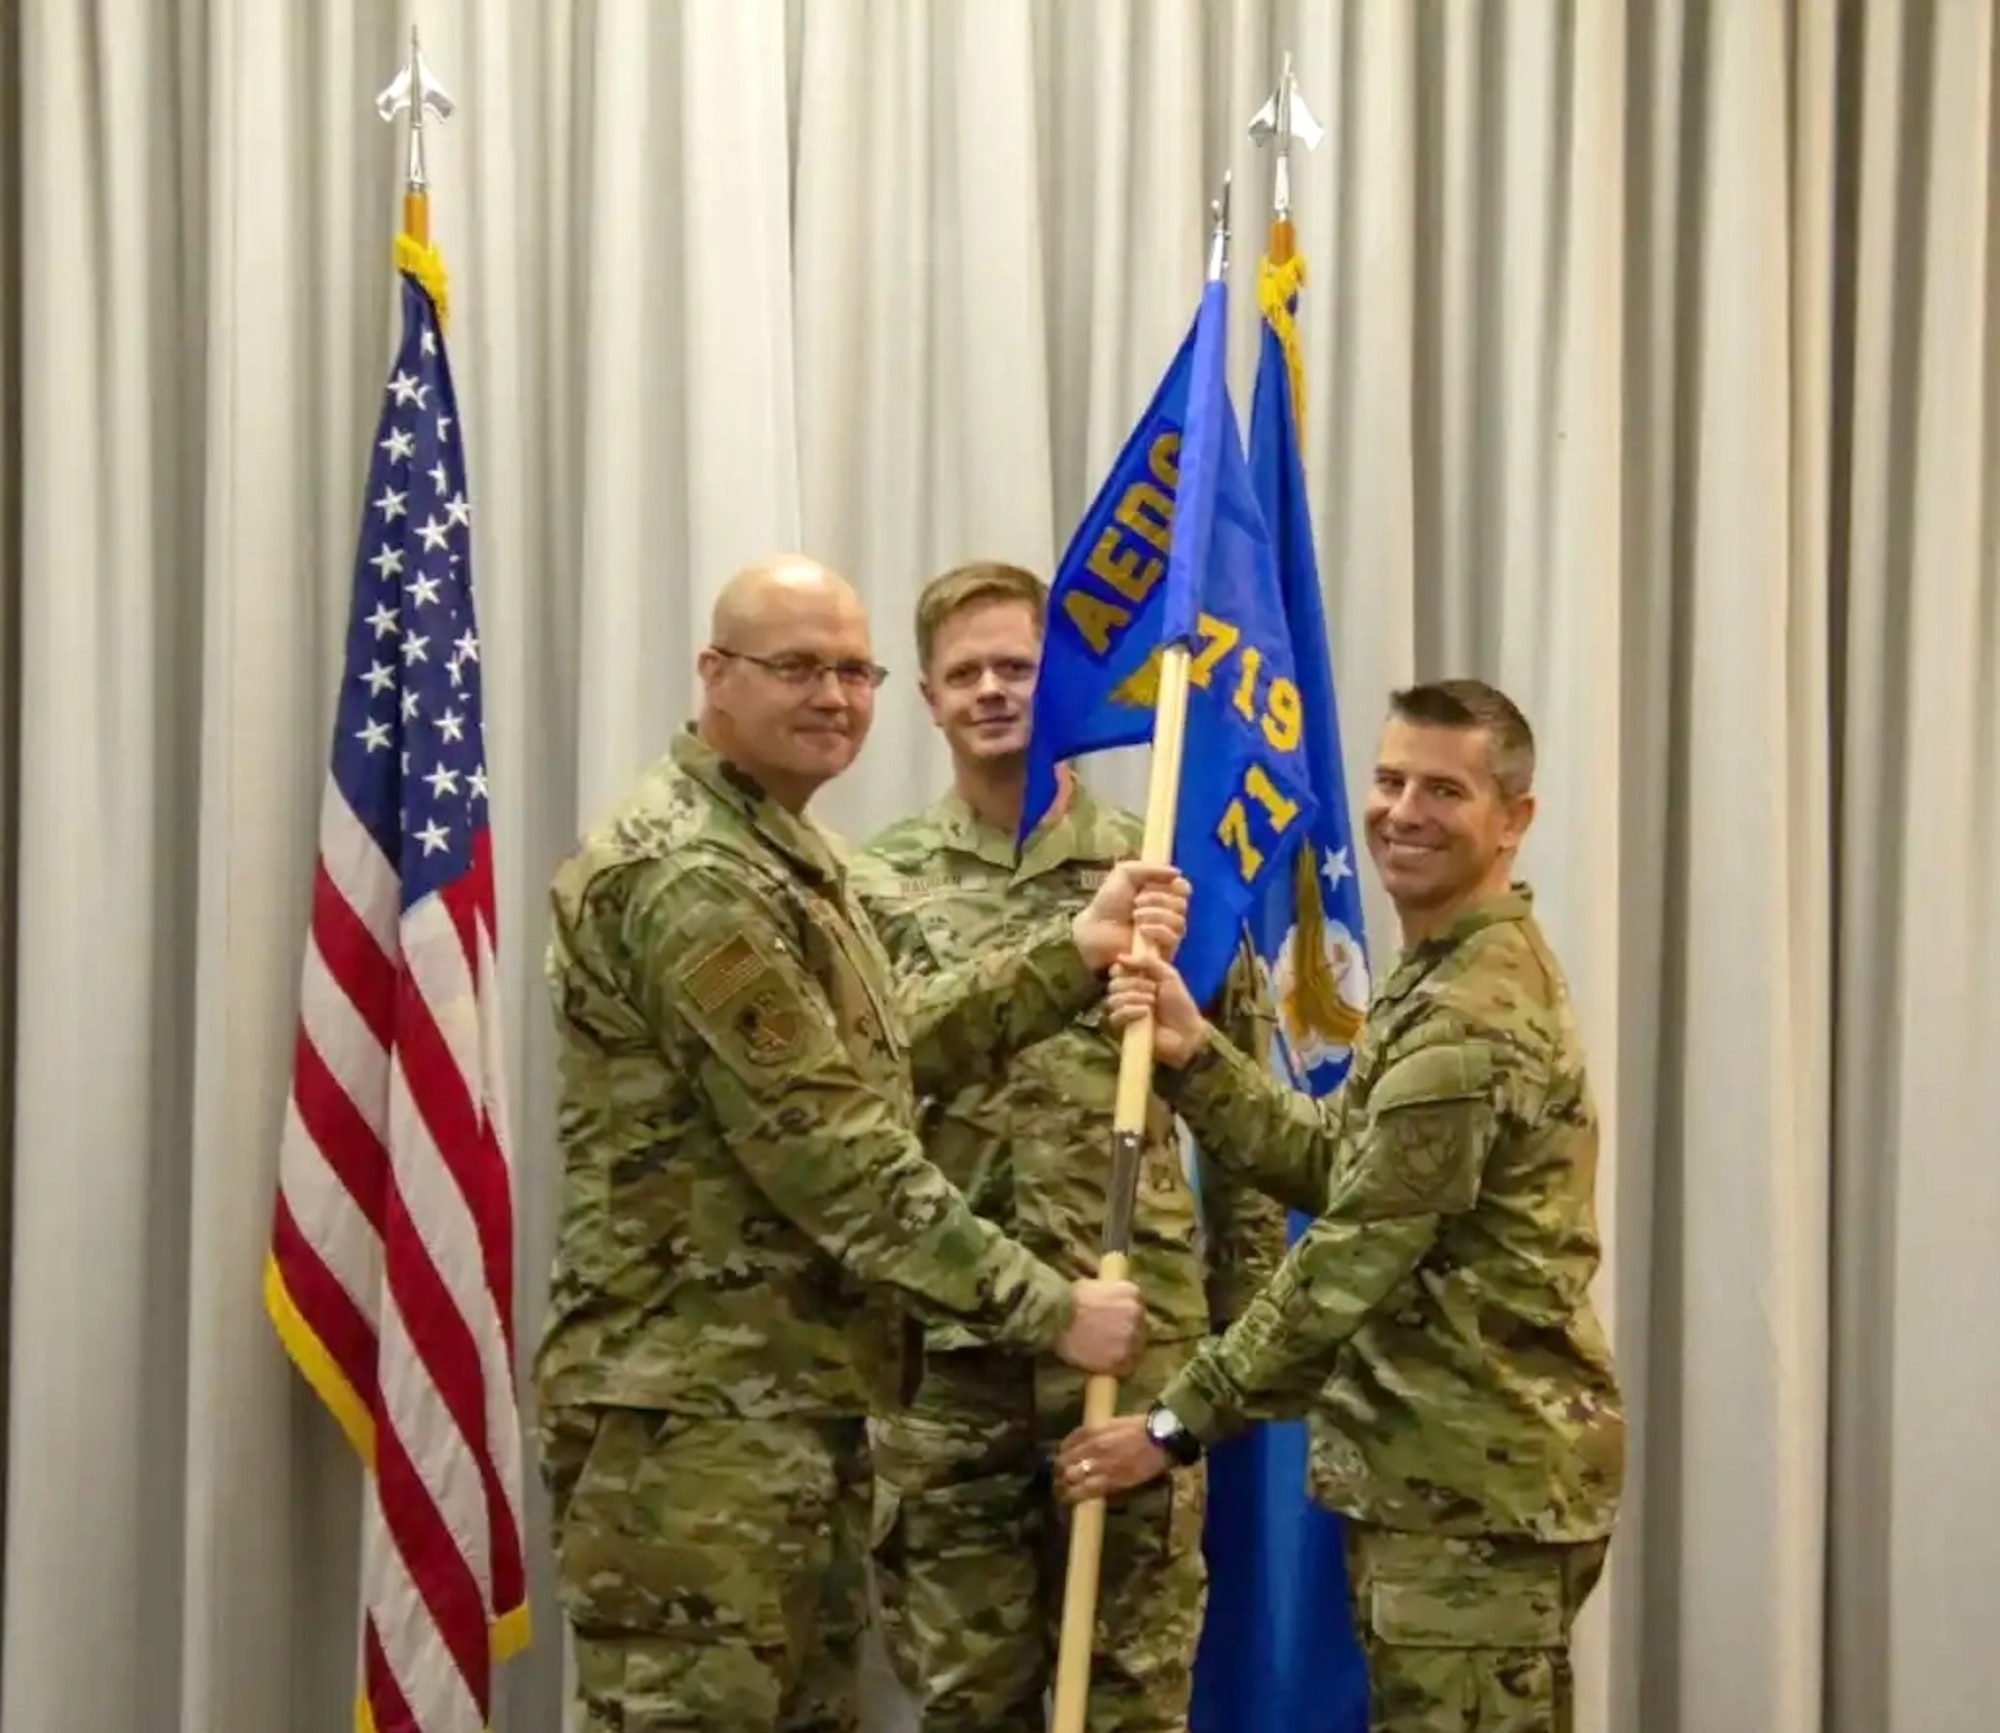 Col. Jason Vap, left, commander, 804th Test Group, passes the 719th Test Squadron guidon to Lt. Col. Jason Heersche, charging him with command of the squadron during a change of command ceremony.